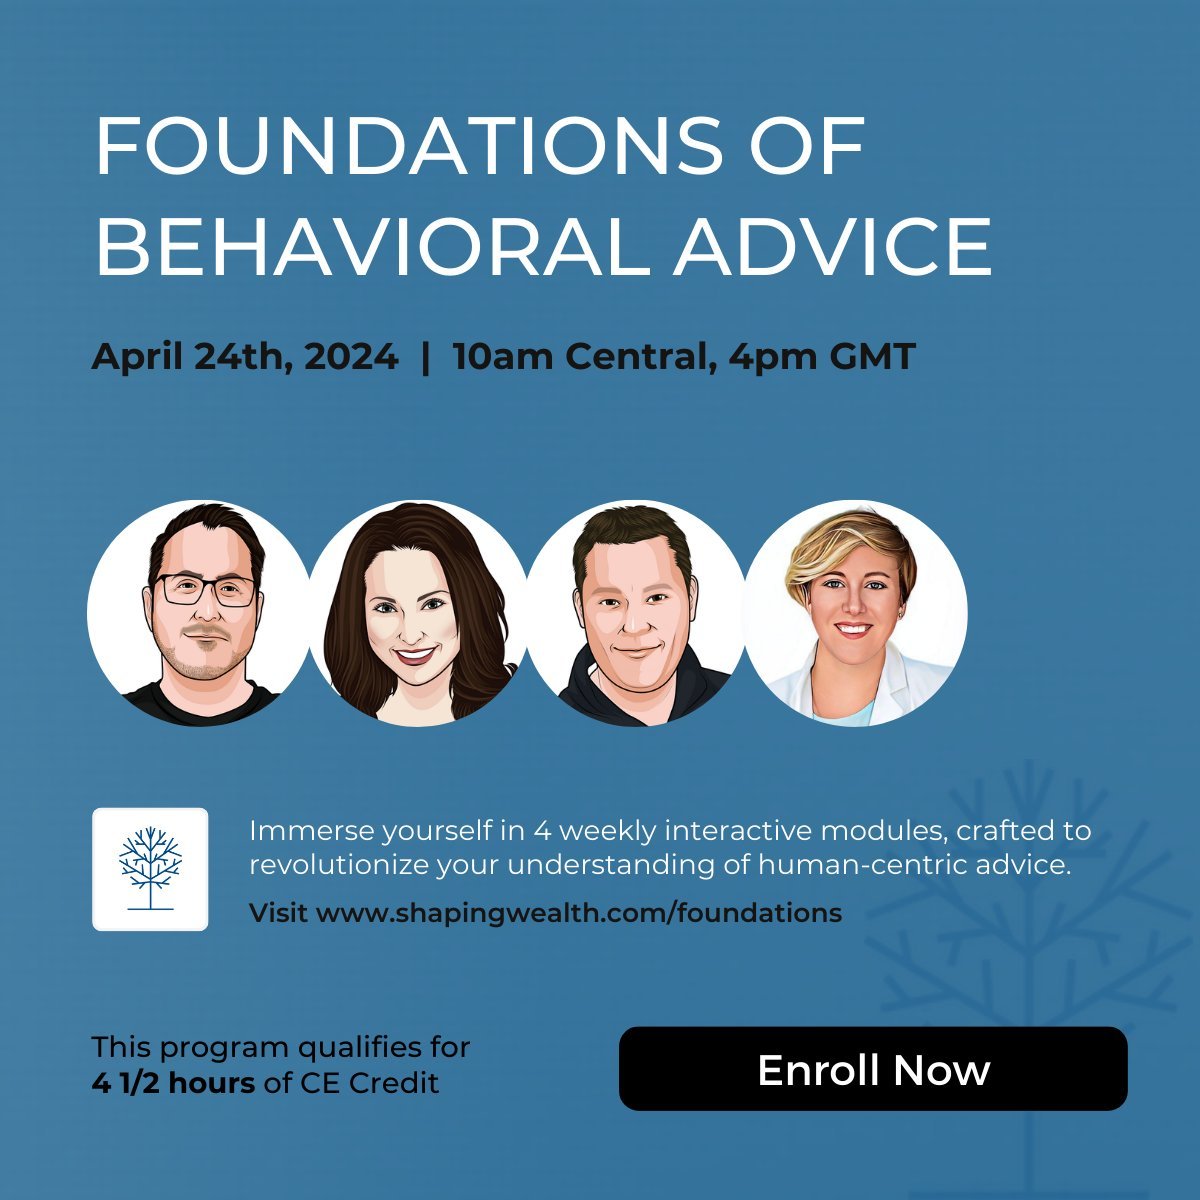 The countdown has started! In just over a week's time, the Foundations of Behavioral Advice program kicks off. Registration closes this coming Friday (April 19th), so don't wait around much longer. Click here to register: shapingwealth.com/foundations